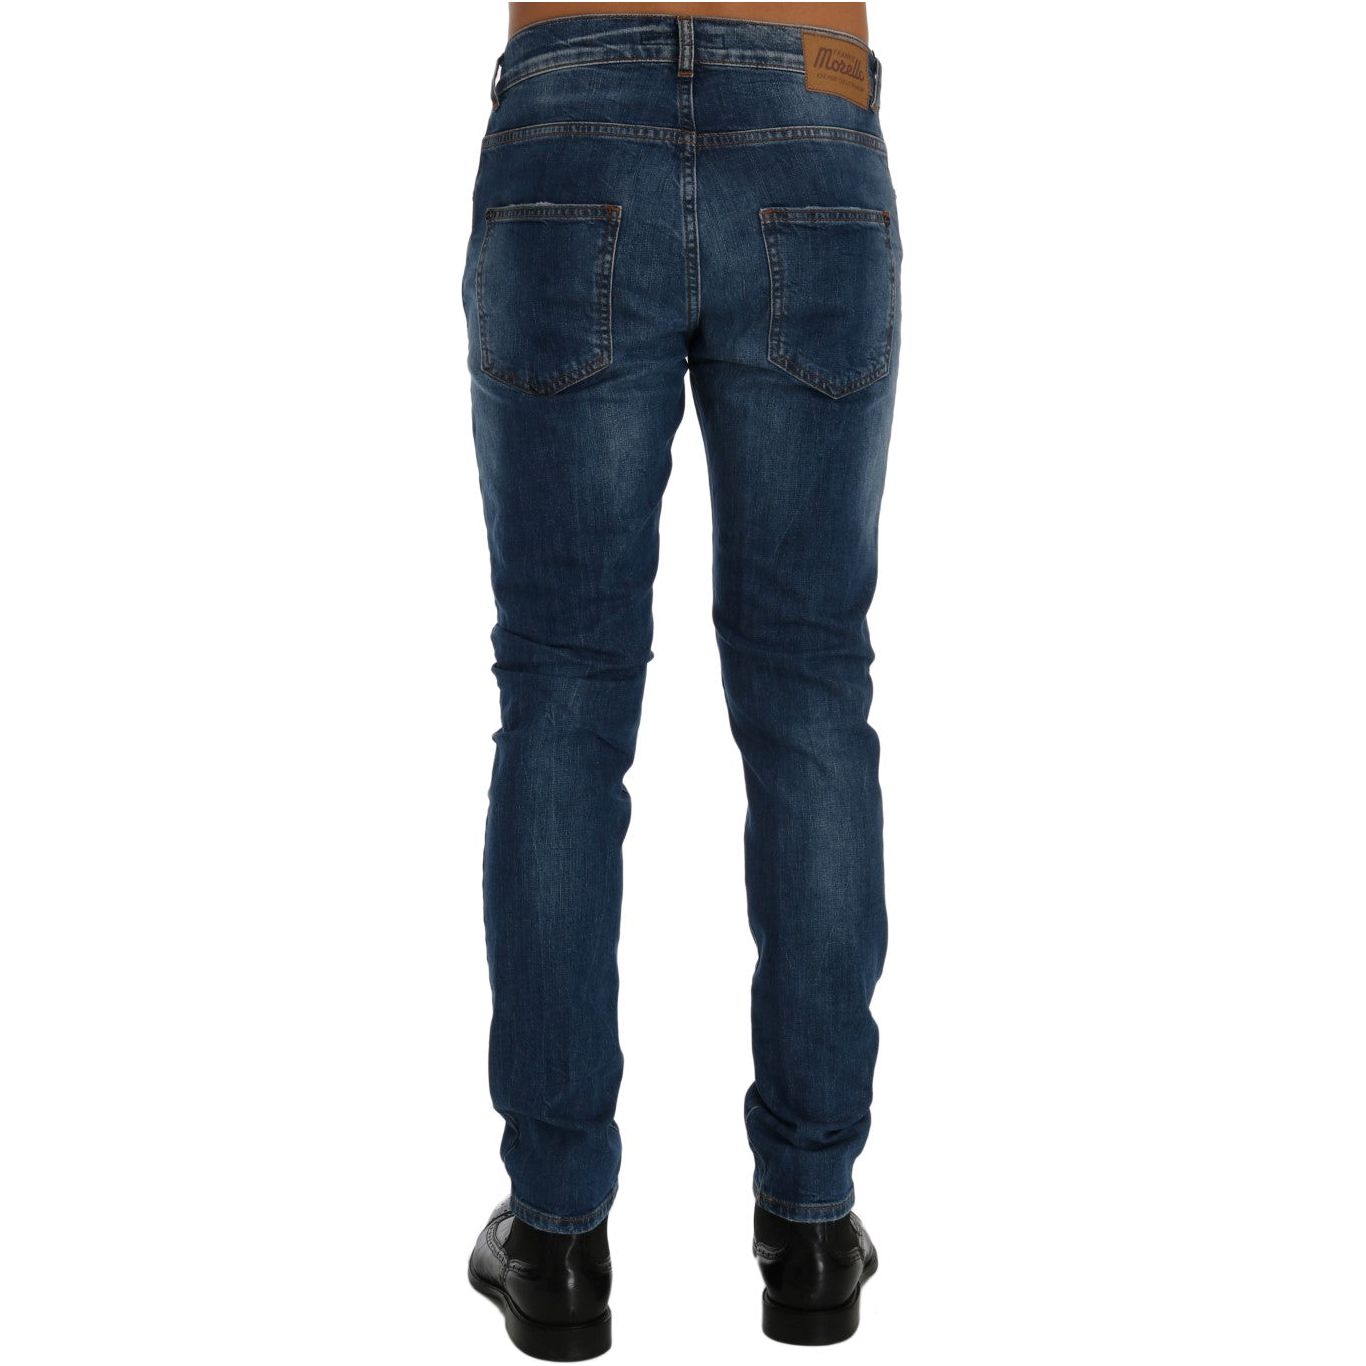 Frankie Morello Chic Slim Fit Blue Distressed Jeans blue-wash-torn-dundee-slim-fit-jeans